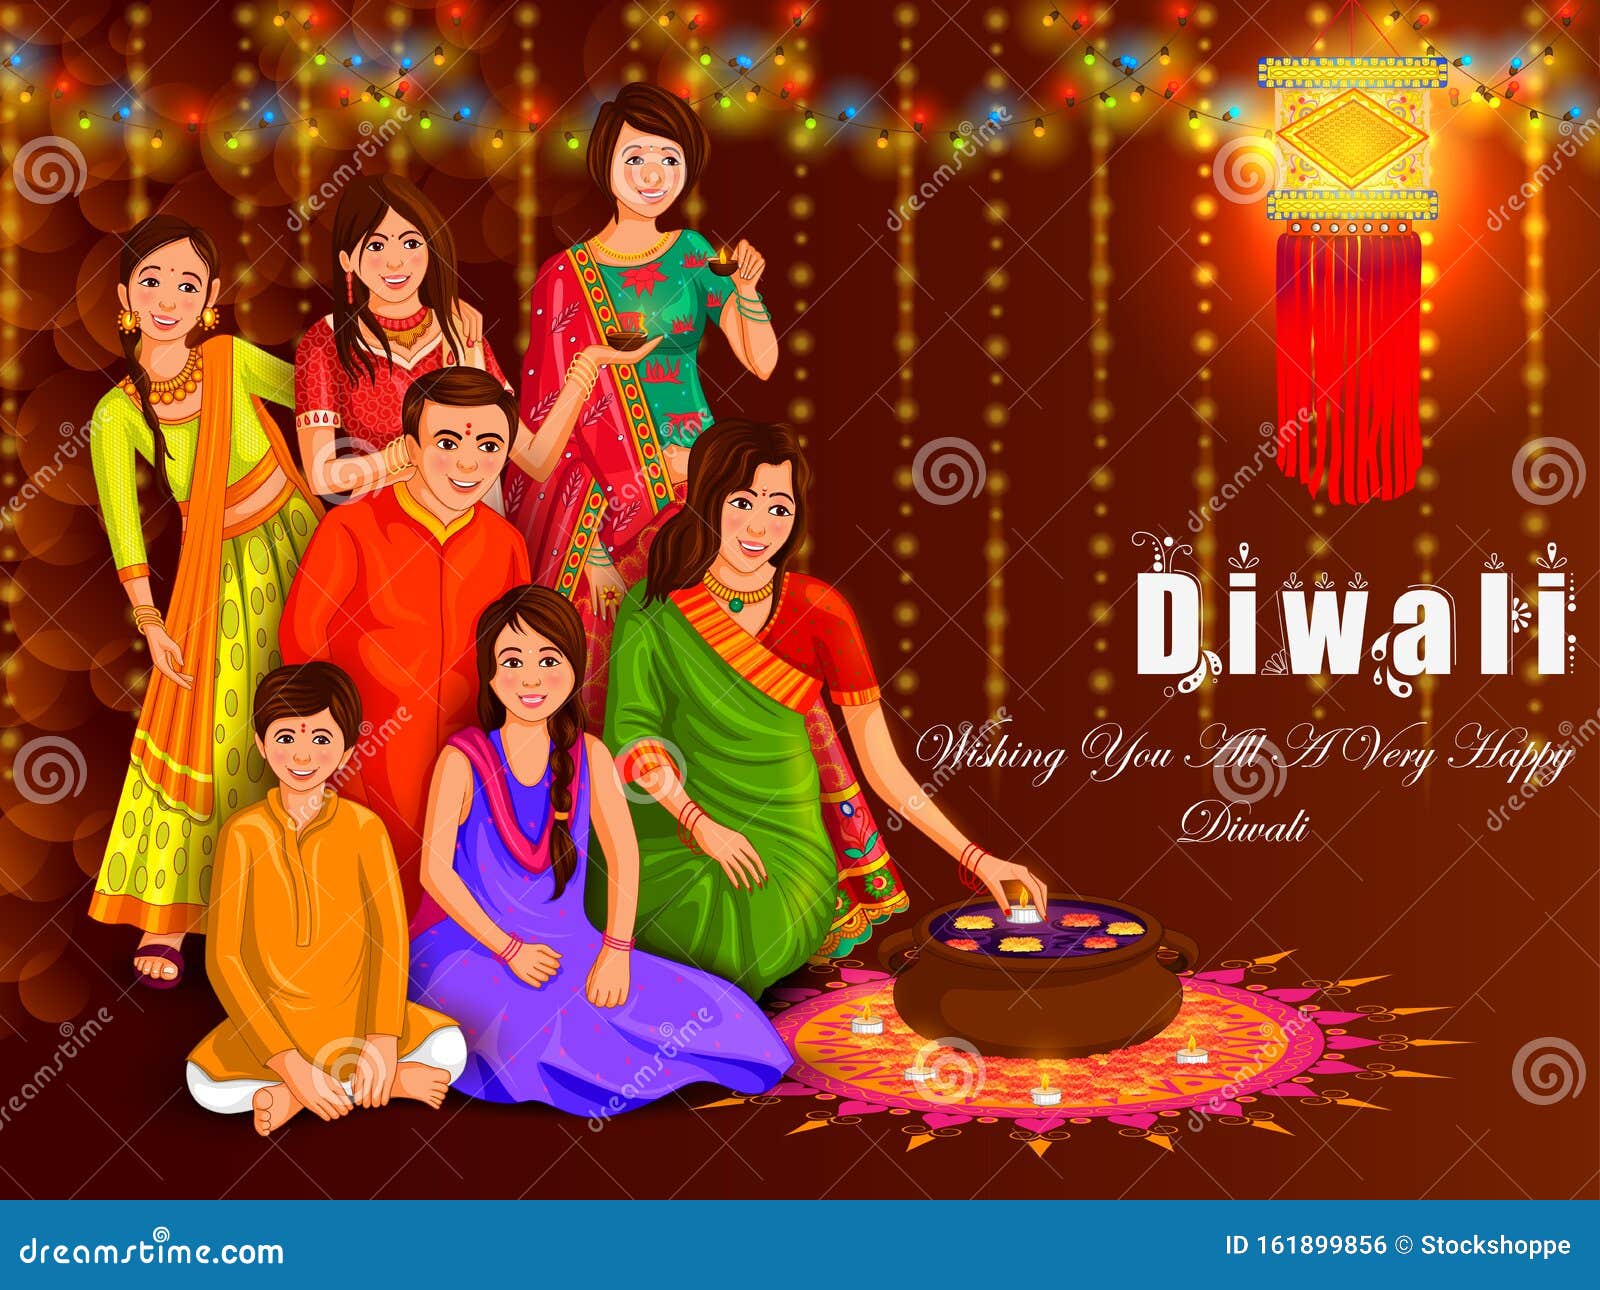 Indian Women Diwali Photos and Images & Pictures | Shutterstock